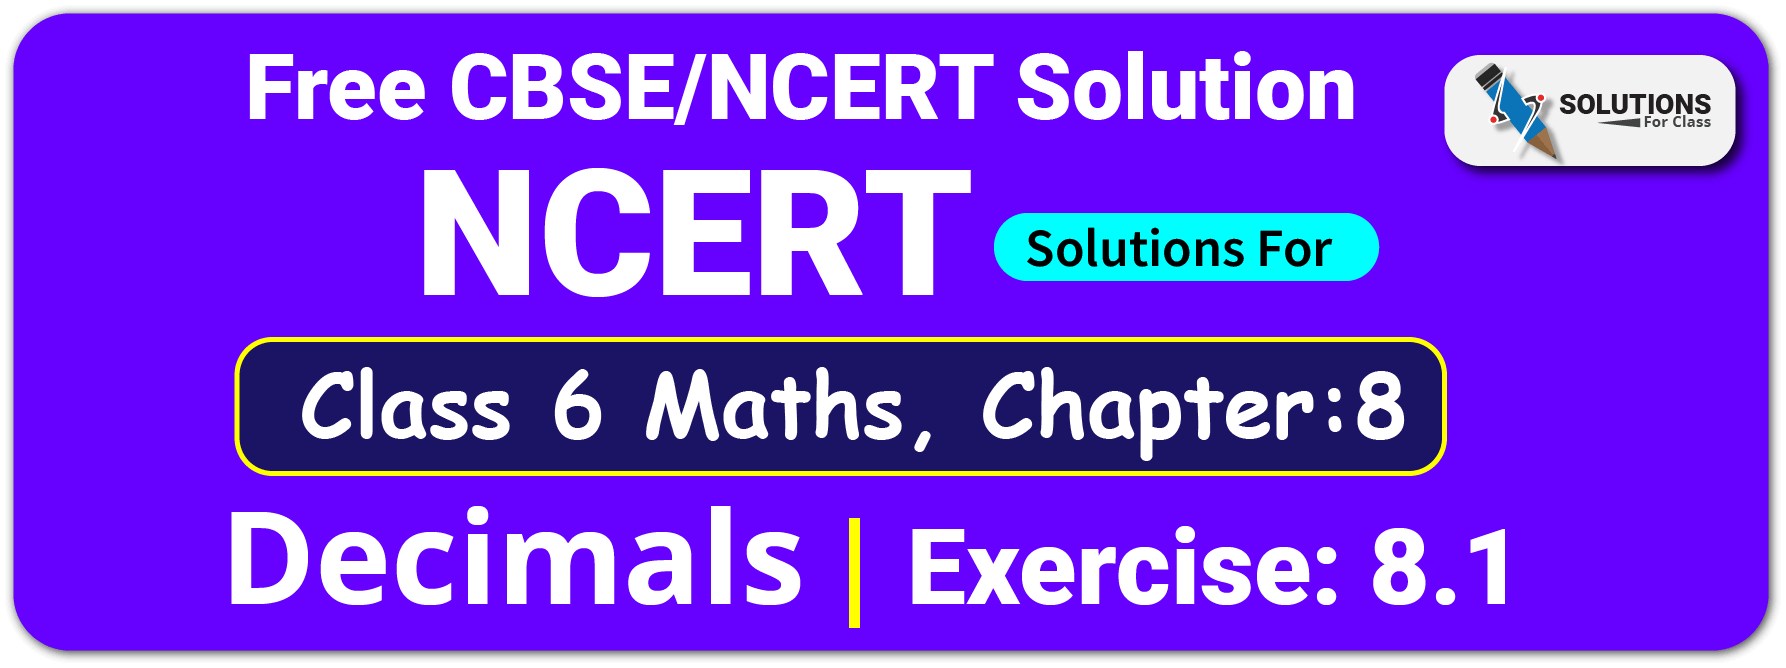 NCERT Solutions For Class 6 Maths Chapter 8 Decimals Exercise 8.1